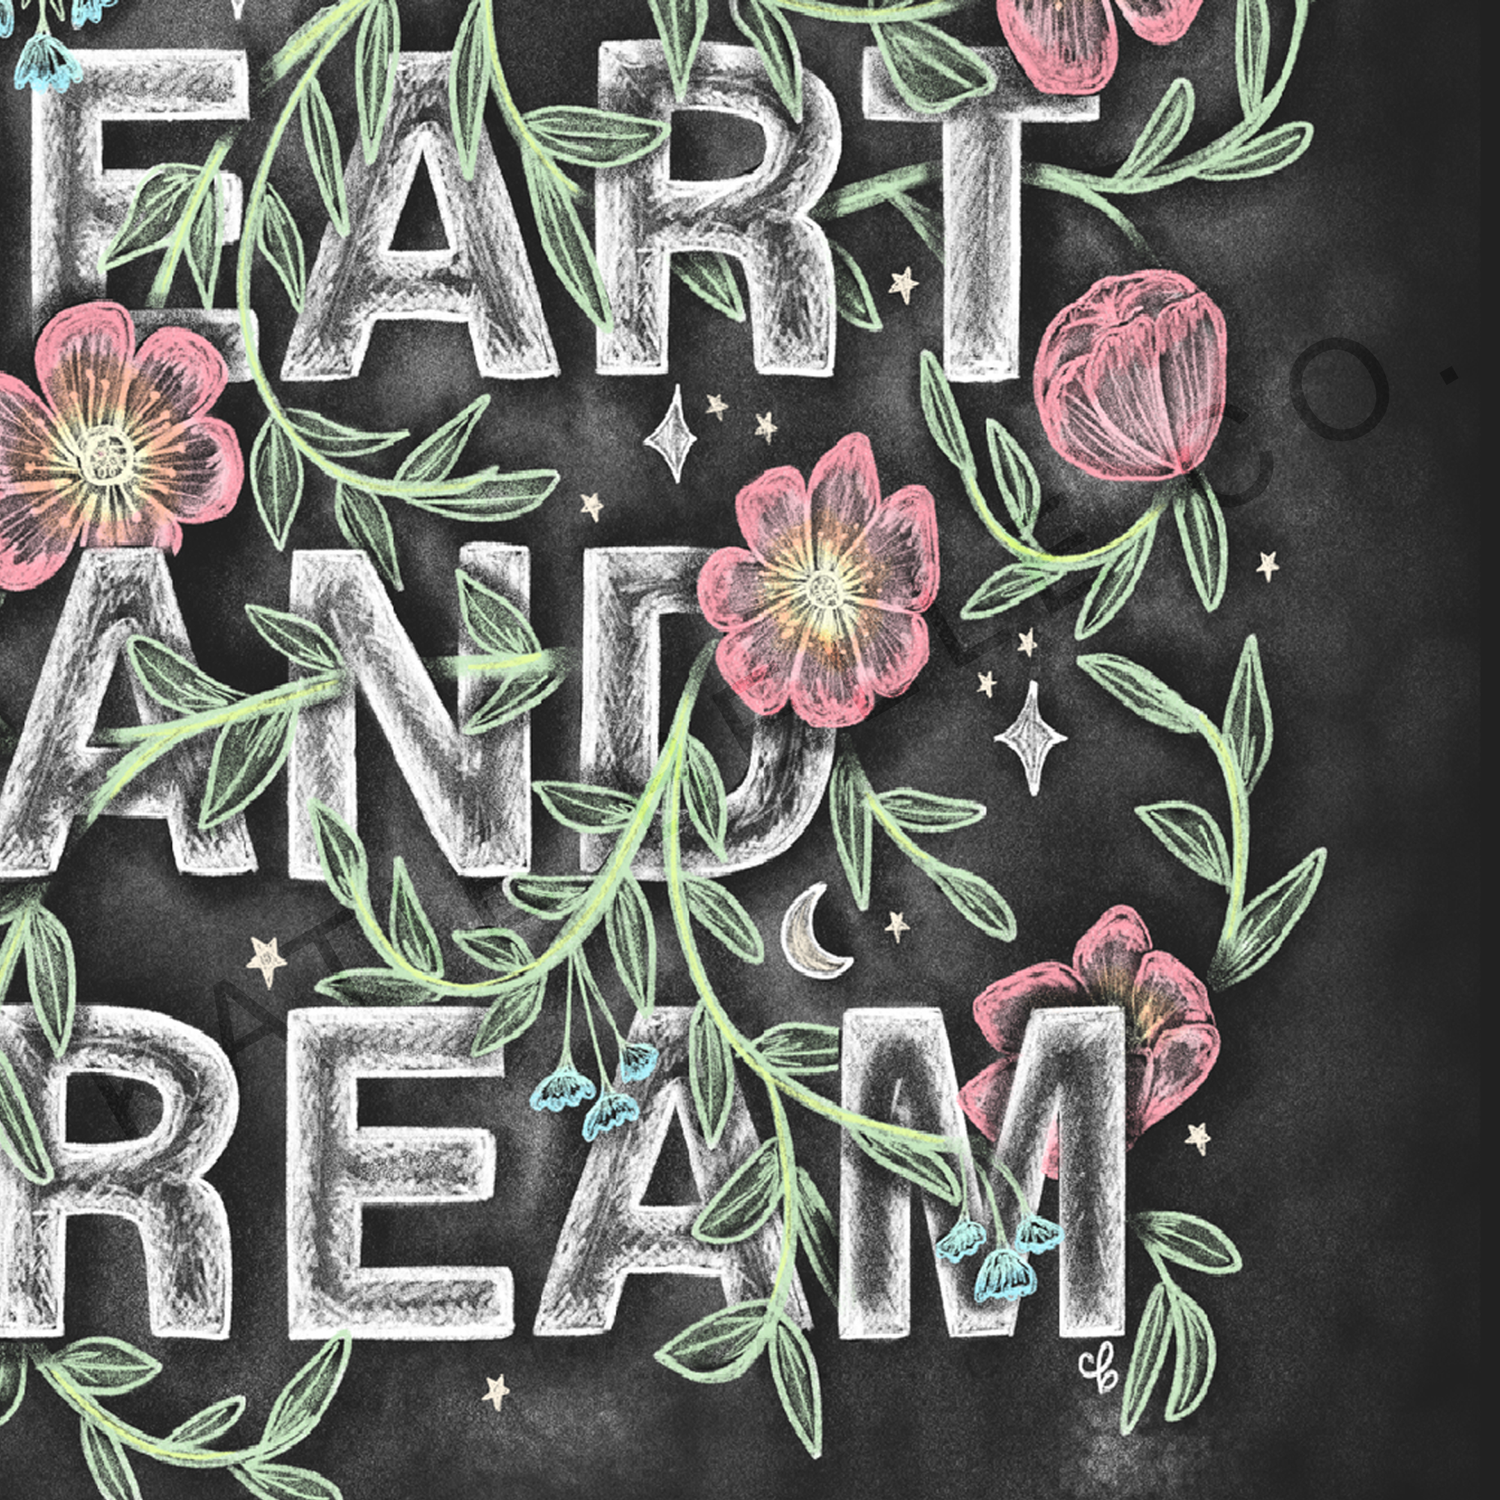 Follow your heart and dream. chalkboard print. chalk art. Pink flowers. lush greenery intertwined in block letters. stars and moons accents. 8 x 10 print. Unframed. Katie Belle Co. 